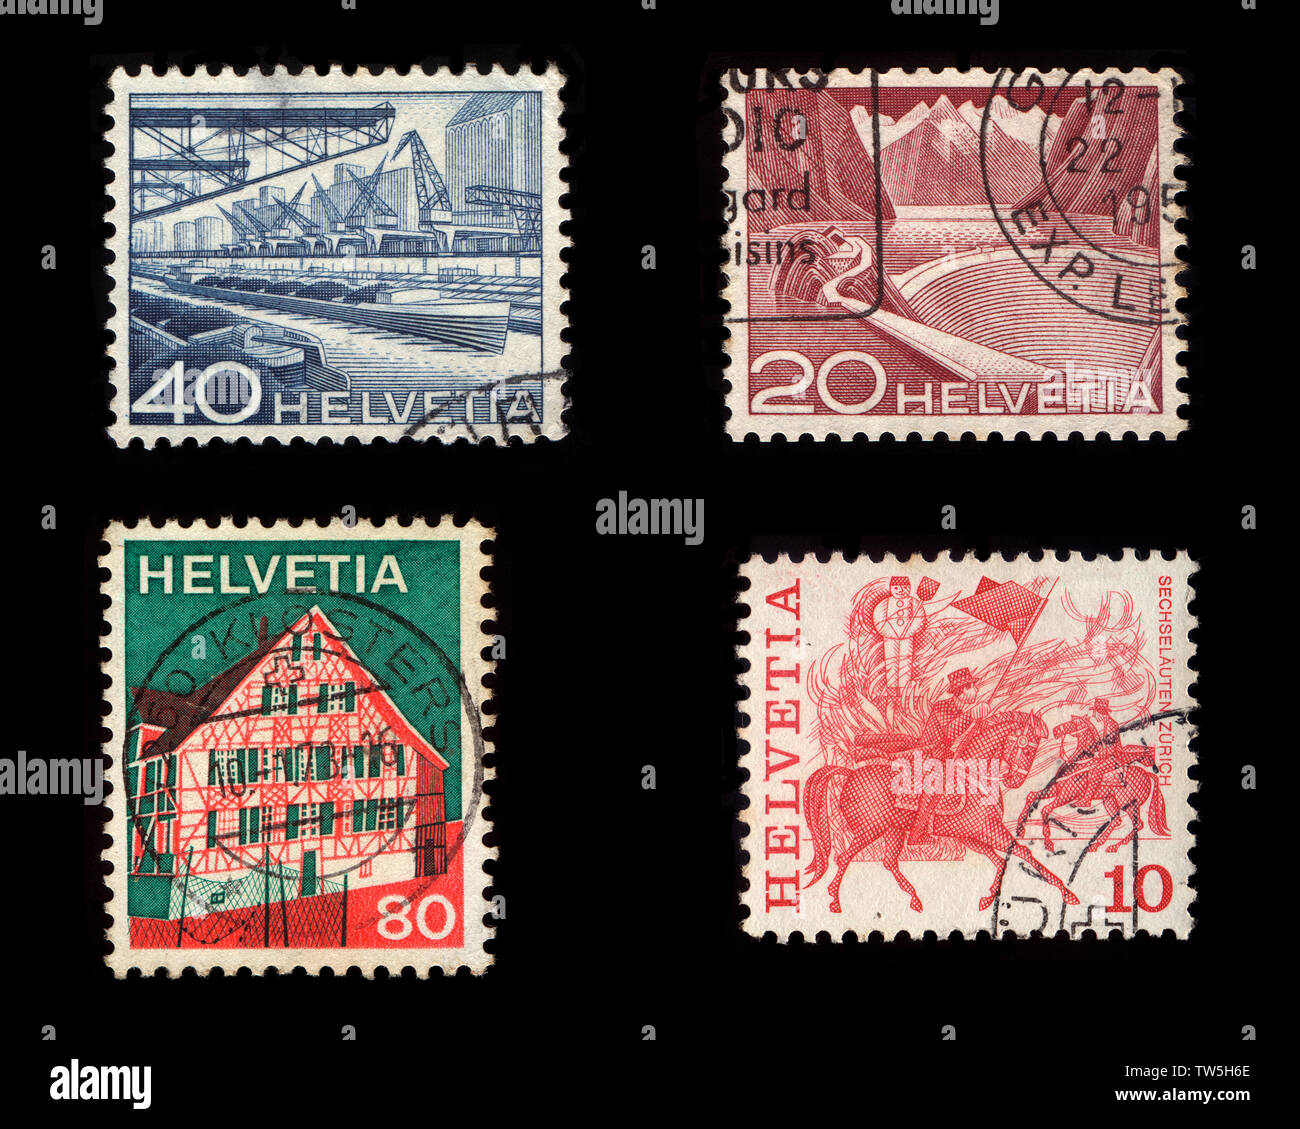 Helvetia Postage Stamps (Isolated on black background) Stock Photo